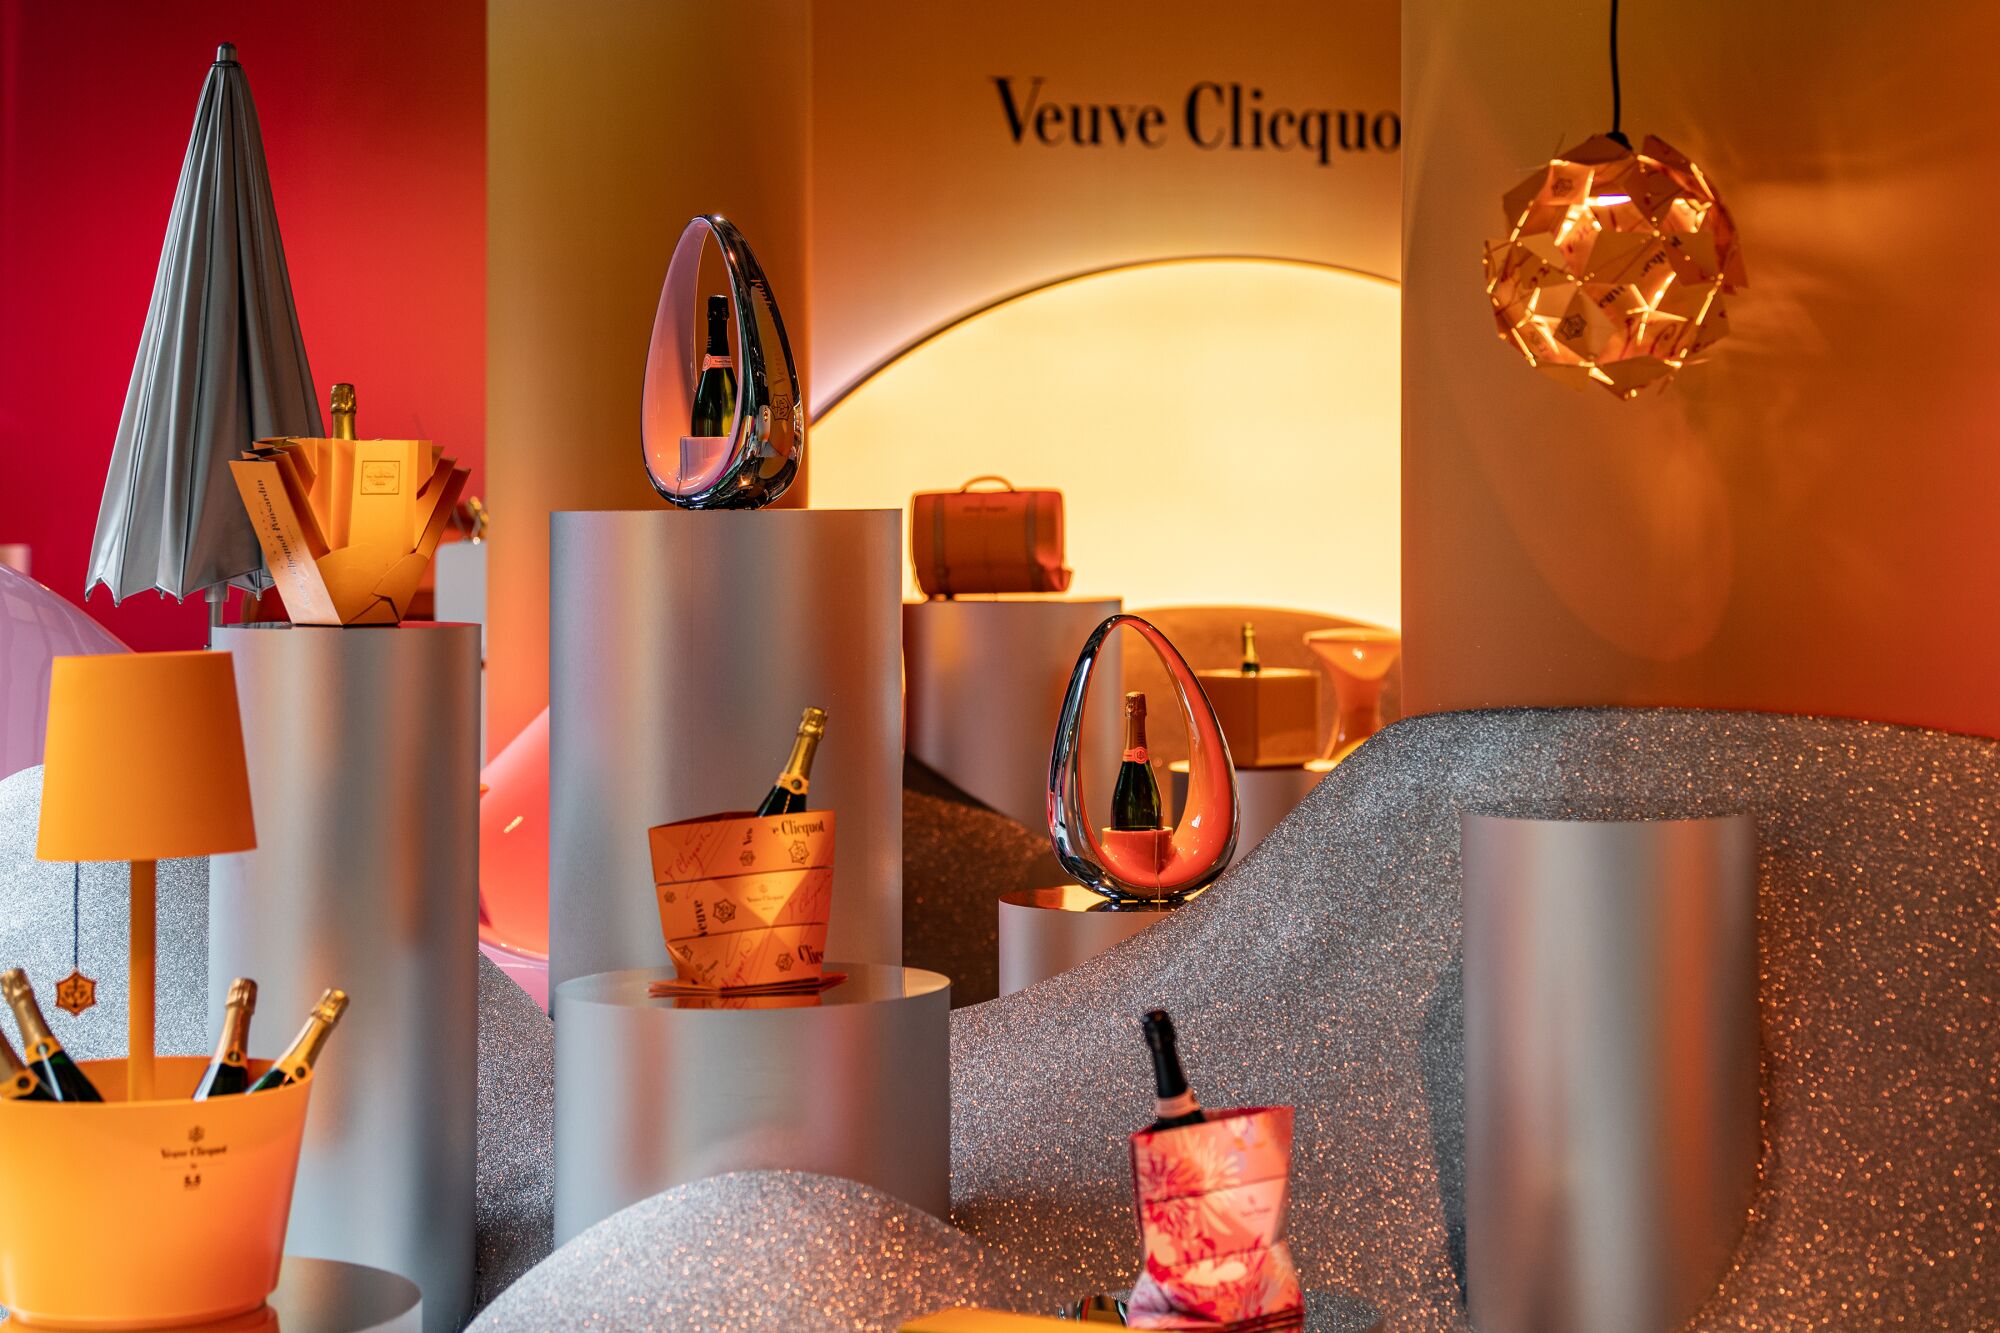 A display of several Champagne bottles presented in unique ways